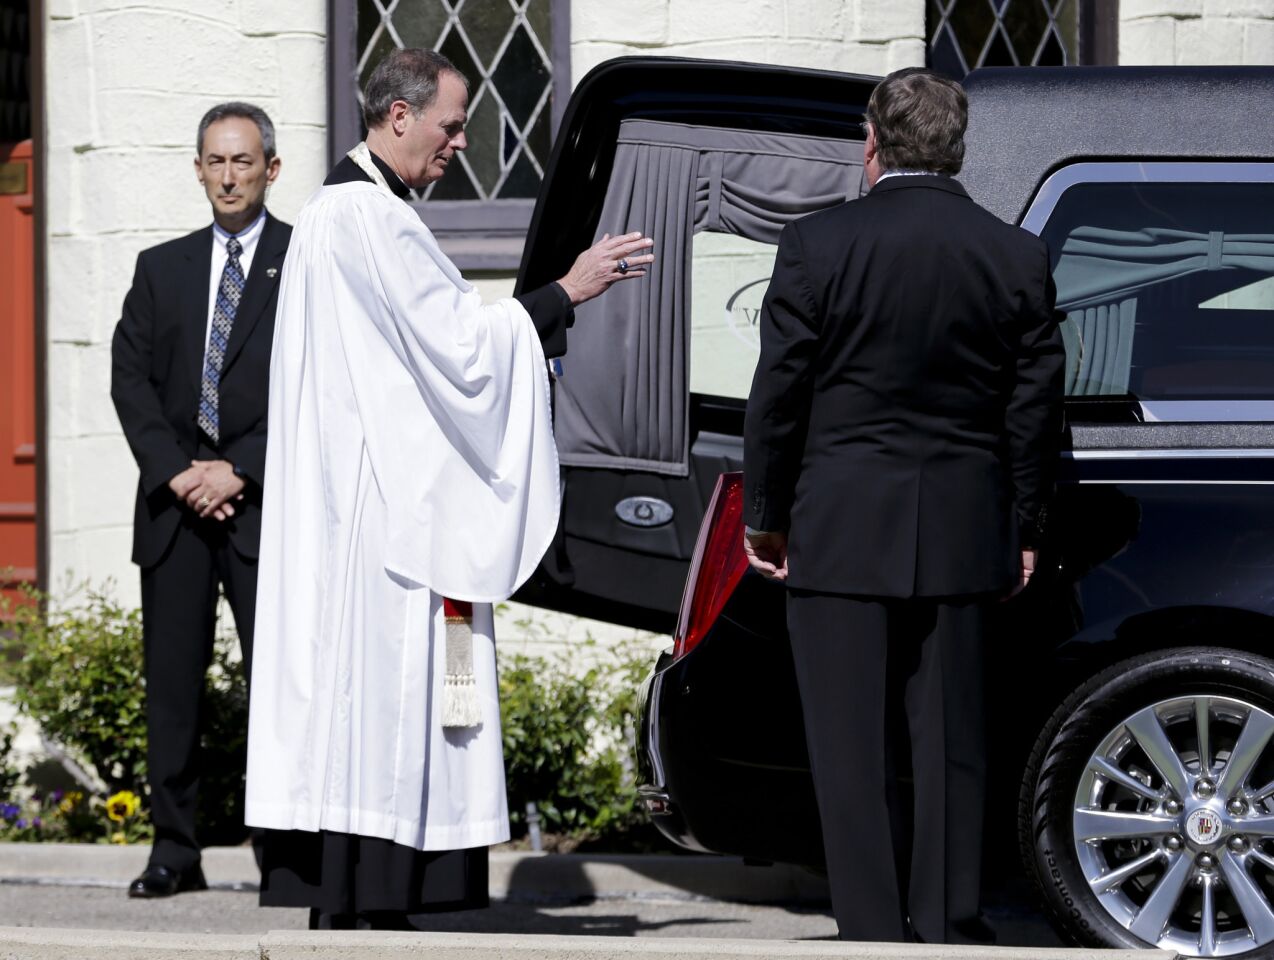 The Rev. Ken Worthy Stuart, Vicar of the Washington National Cathedral, gives the final blessing after the casket carrying the former first lady Nancy Reagan was loaded into a hearse at a mortuary in Santa Monica, Calif.